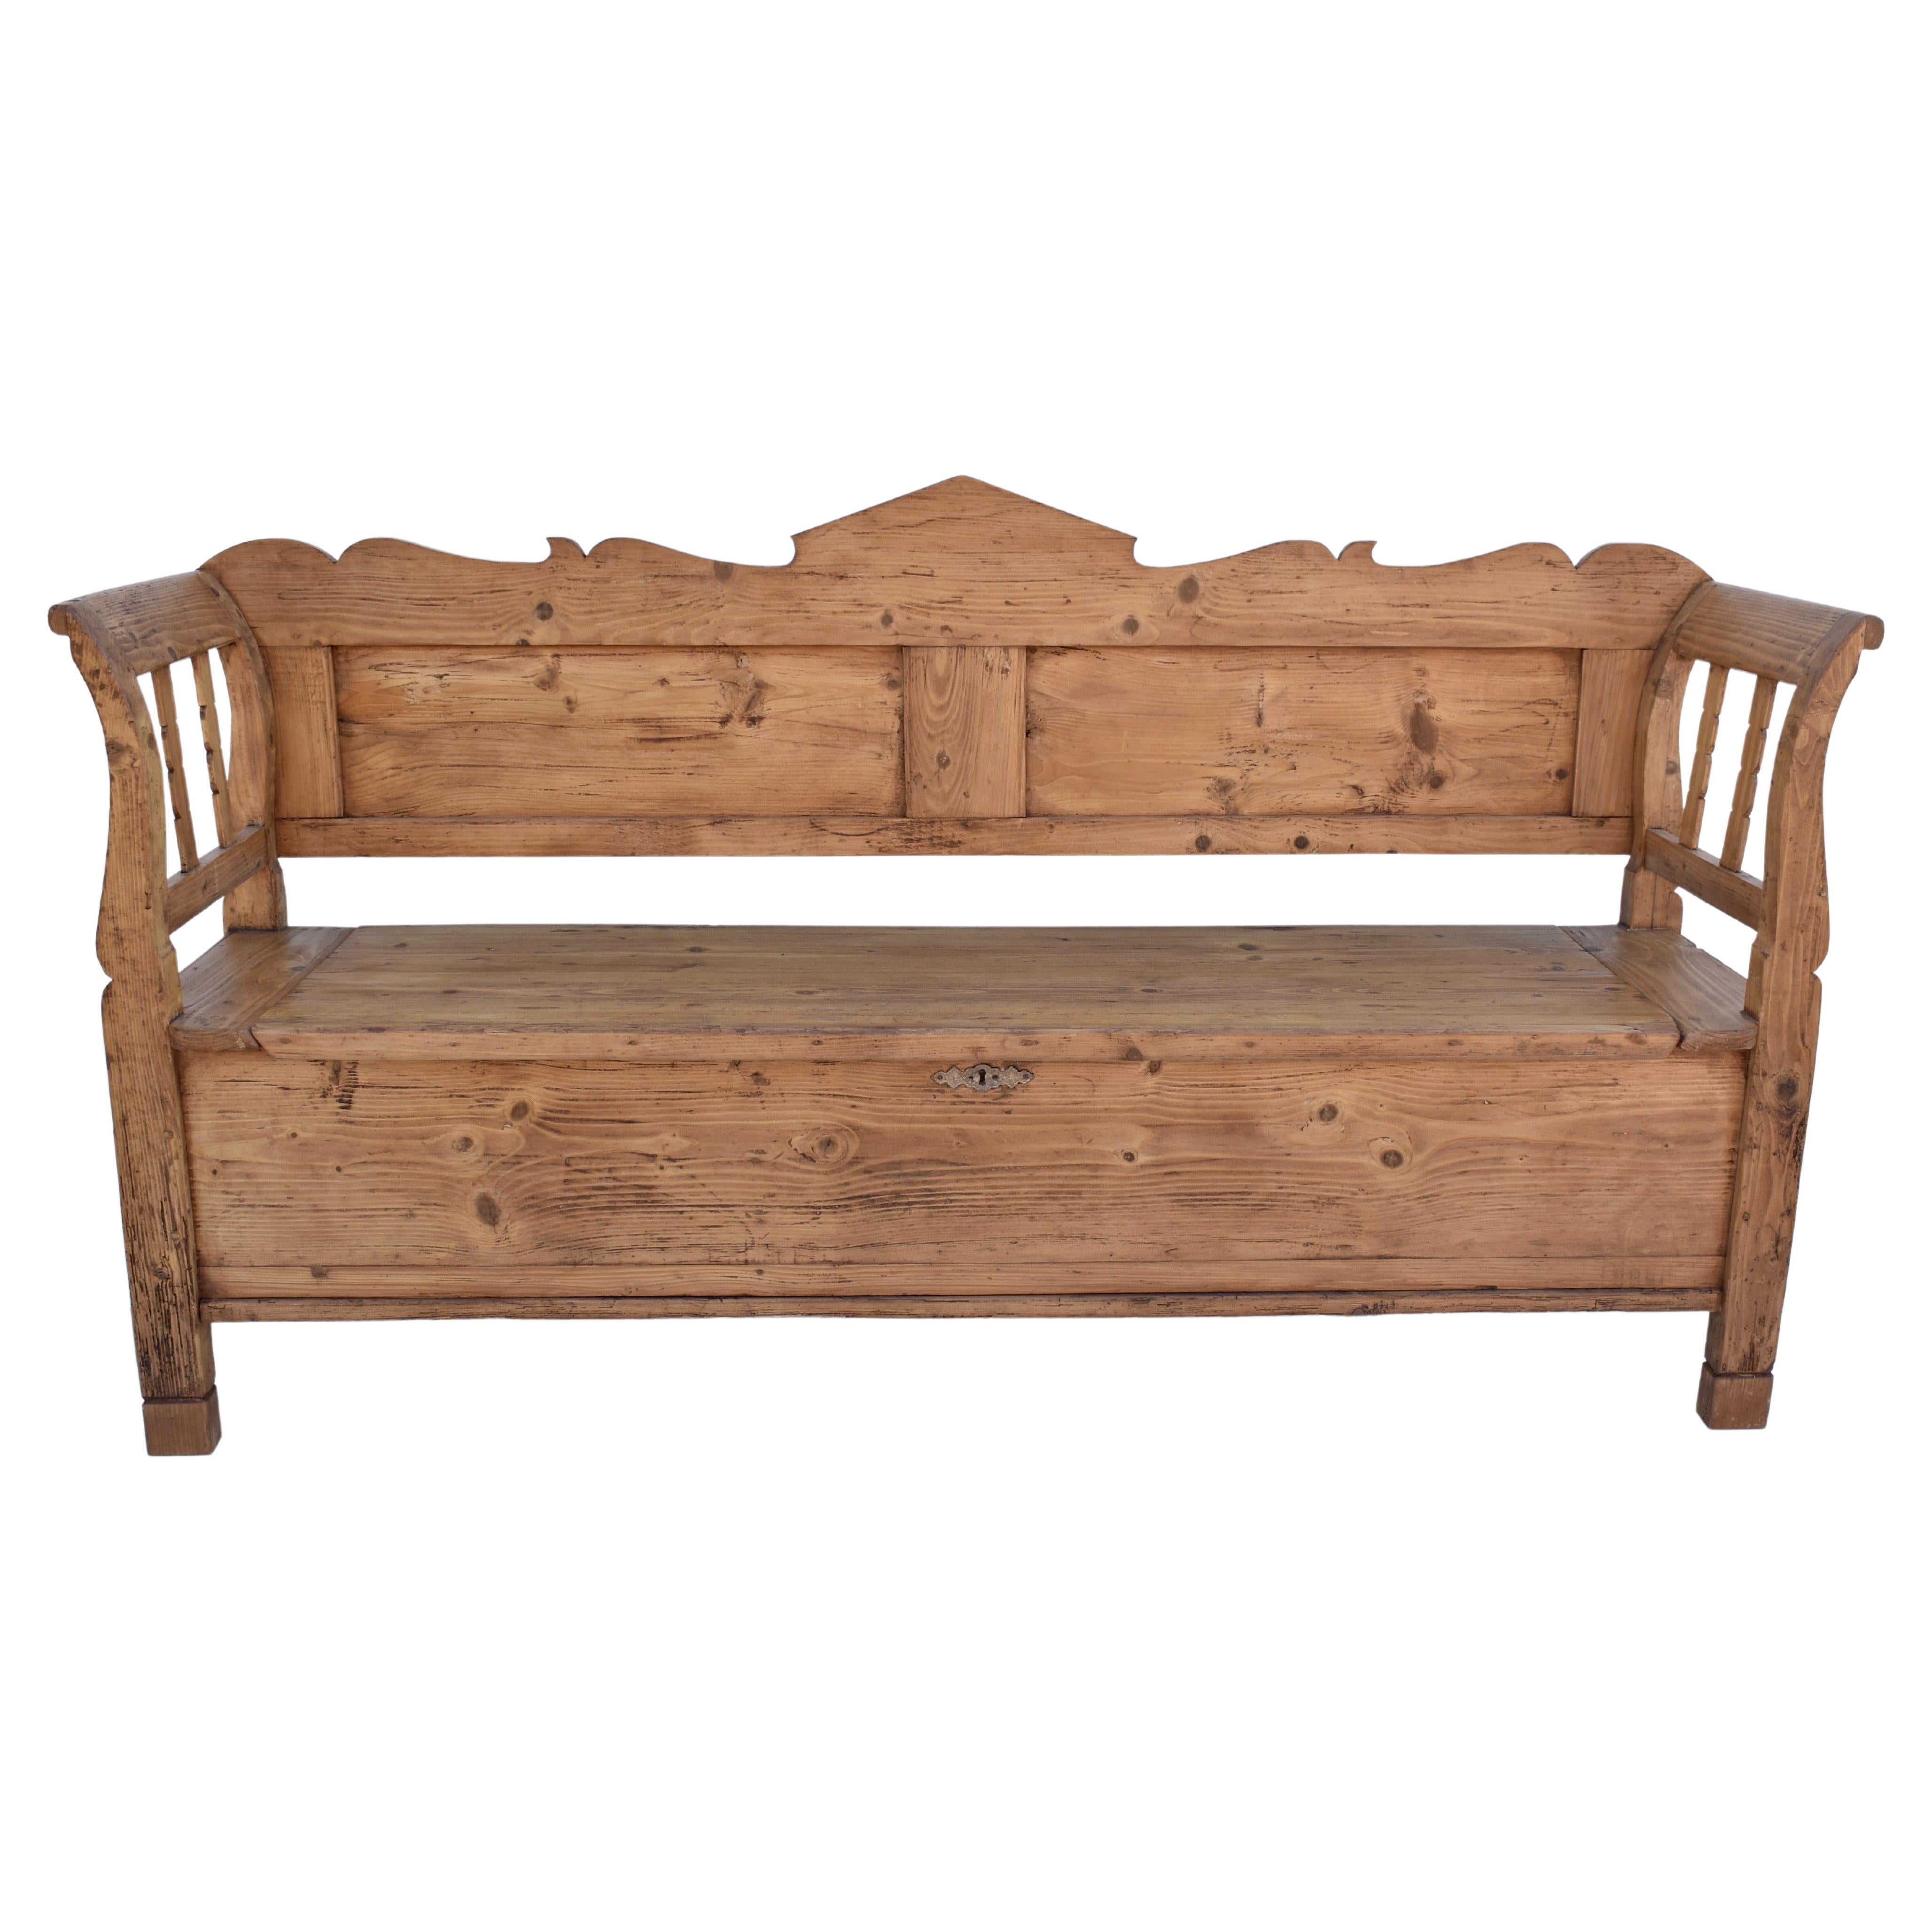 Pine Storage Bench or Settle